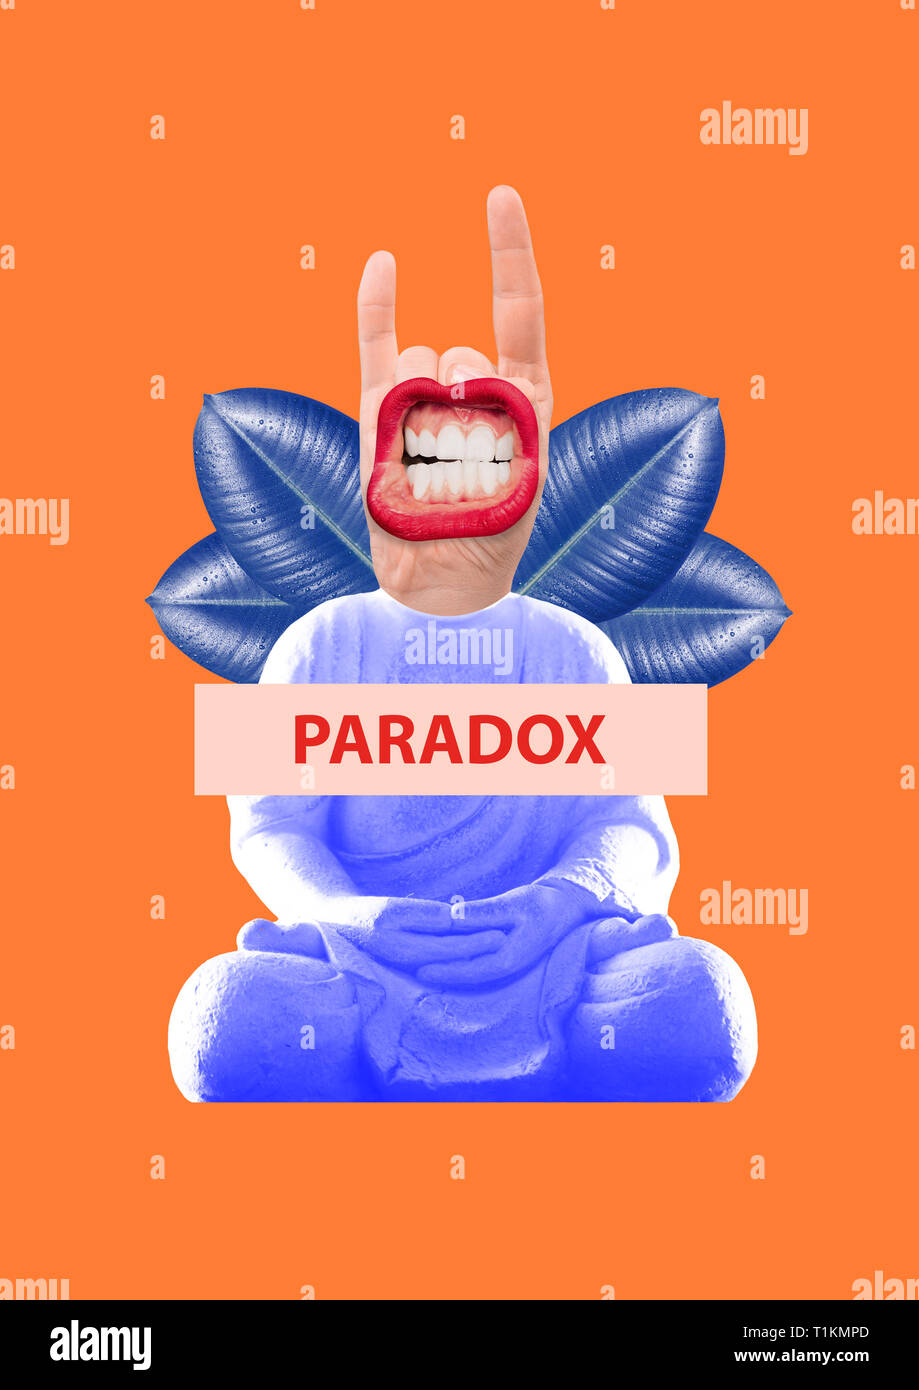 Paradox, calm and drive. Combine incompatible things for being bright. Buddha statue with head as sign of horns and big mouth with teeth screeching. Modern design. Contemporary art collage. Stock Photo